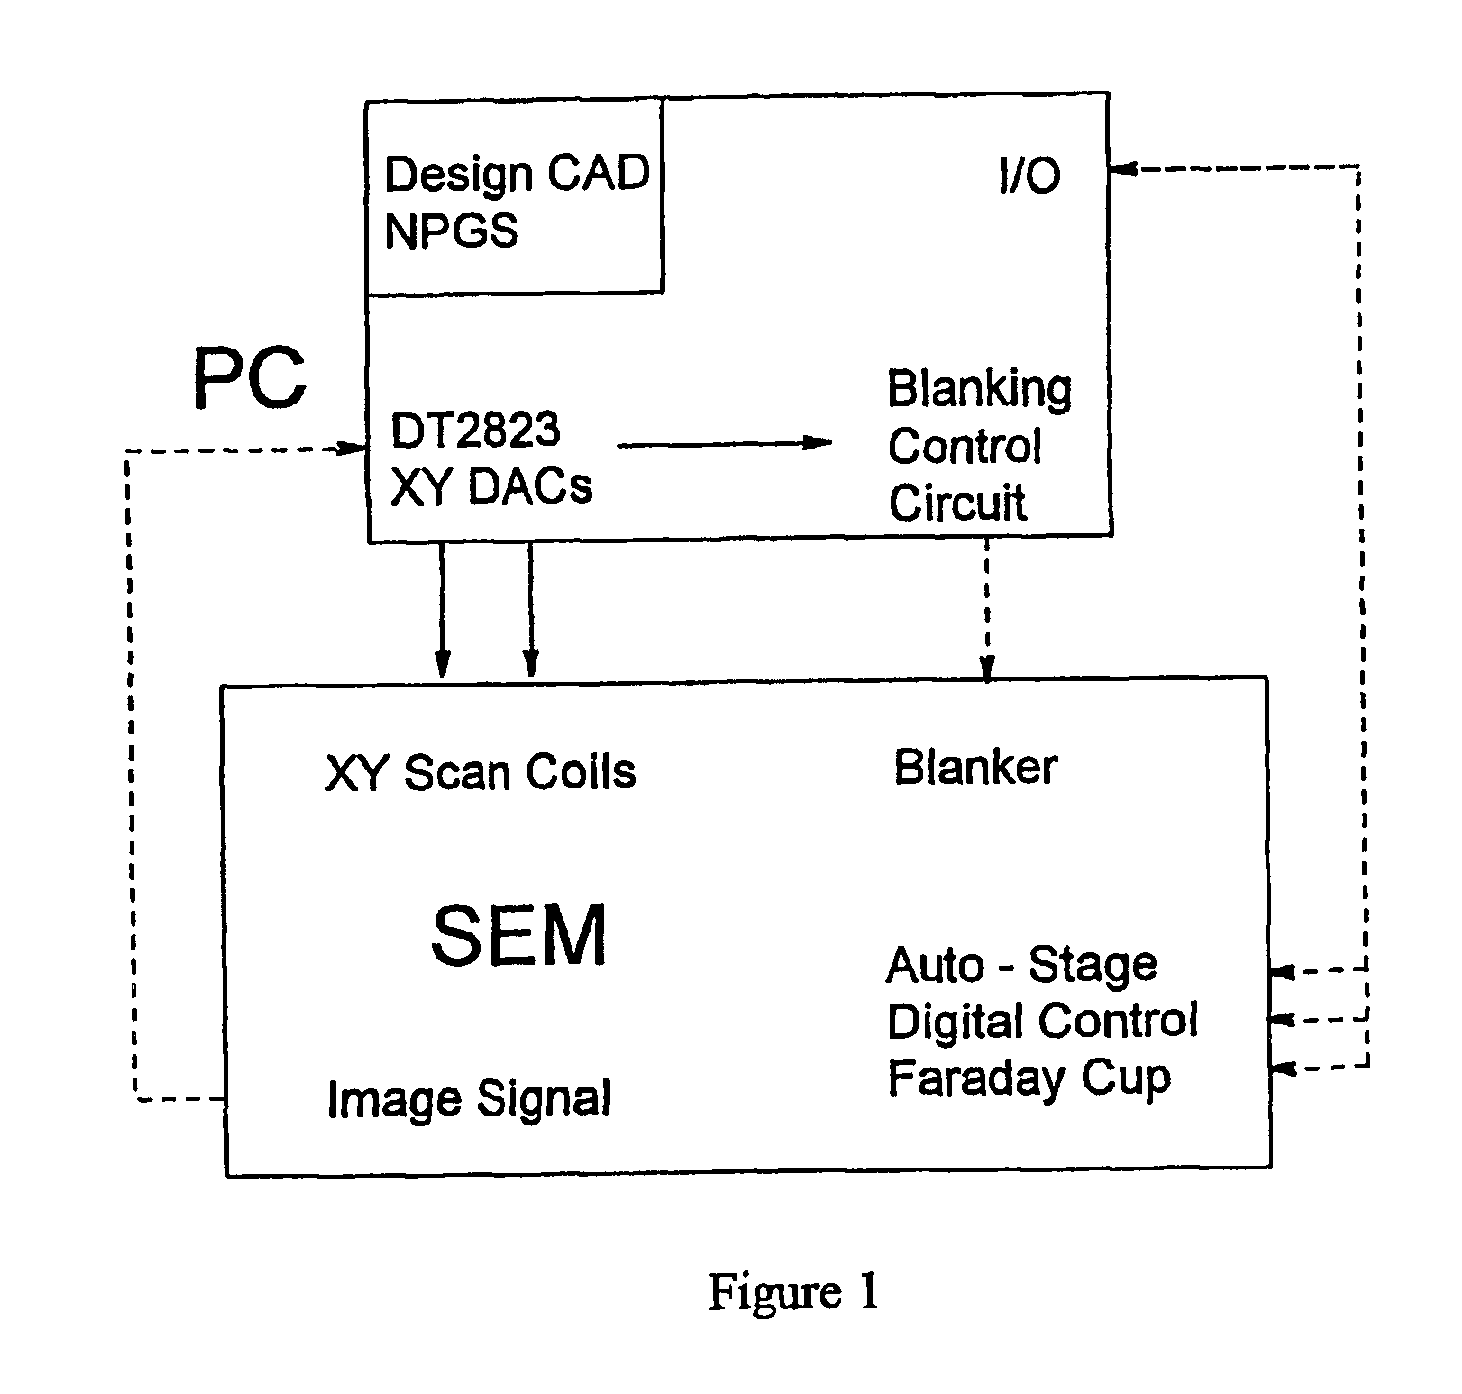 Structured organic materials and devices using low-energy particle beams